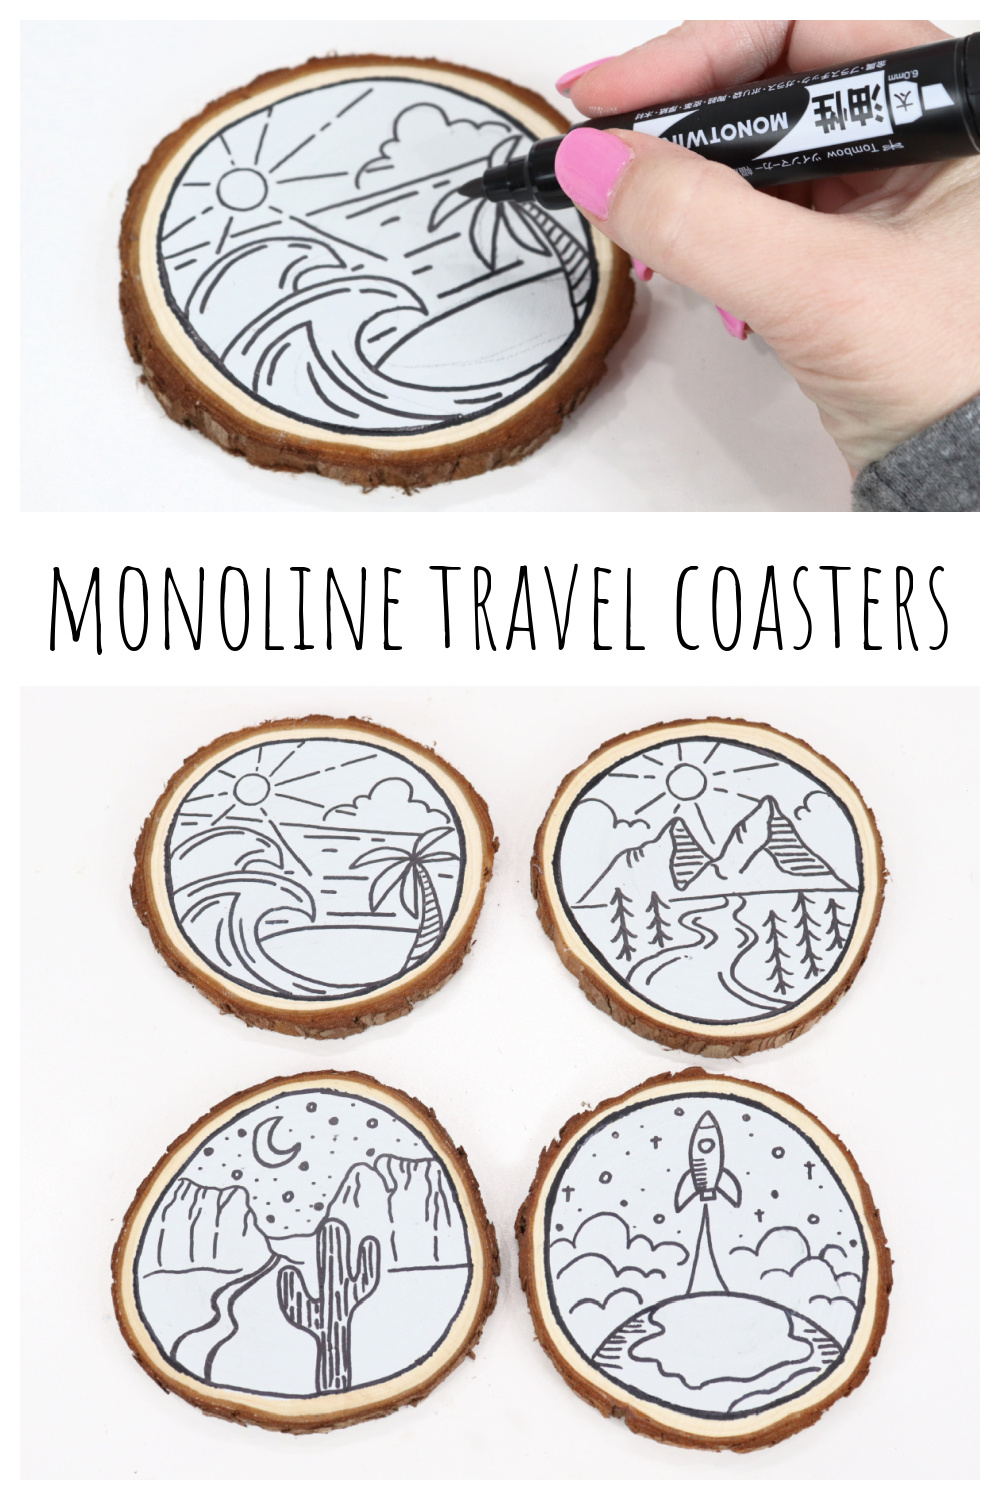 Image is a collage of photos of the finished projects, along with the words, “Monoline Travel Coasters” intended for Pinterest.